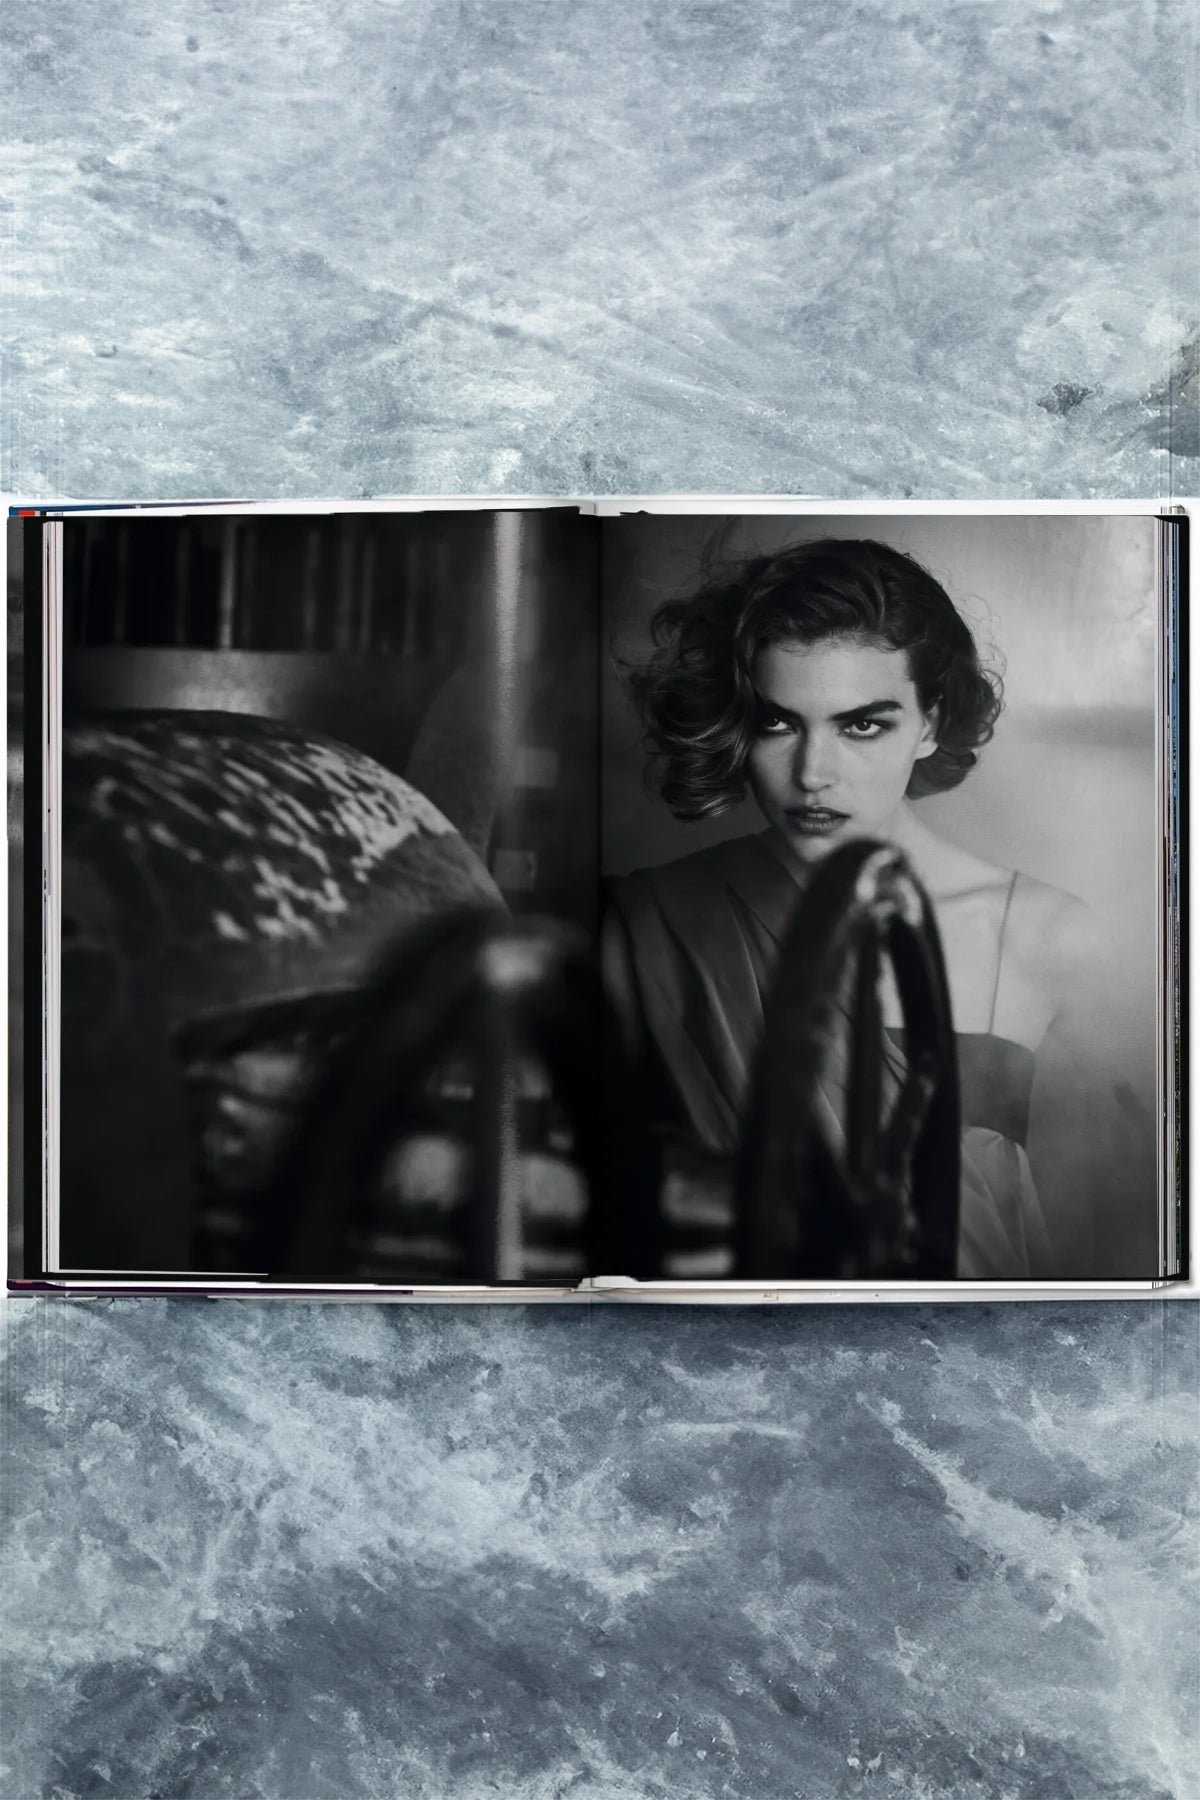 Taschen Peter Lindbergh On Fashion Photography